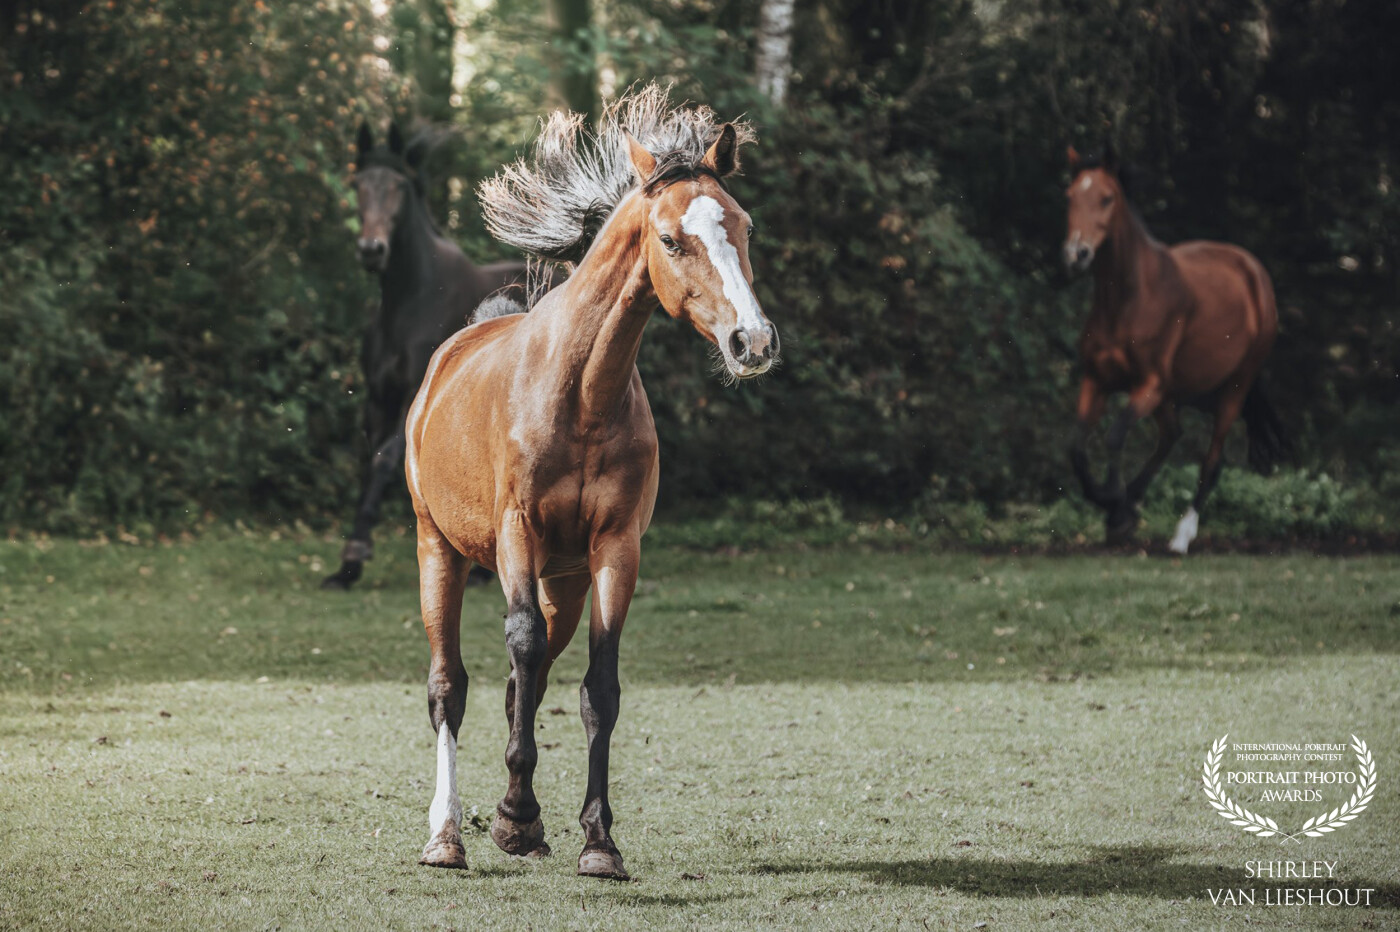 Young horses playing and enjoying themselves in the field. I love such pictures!